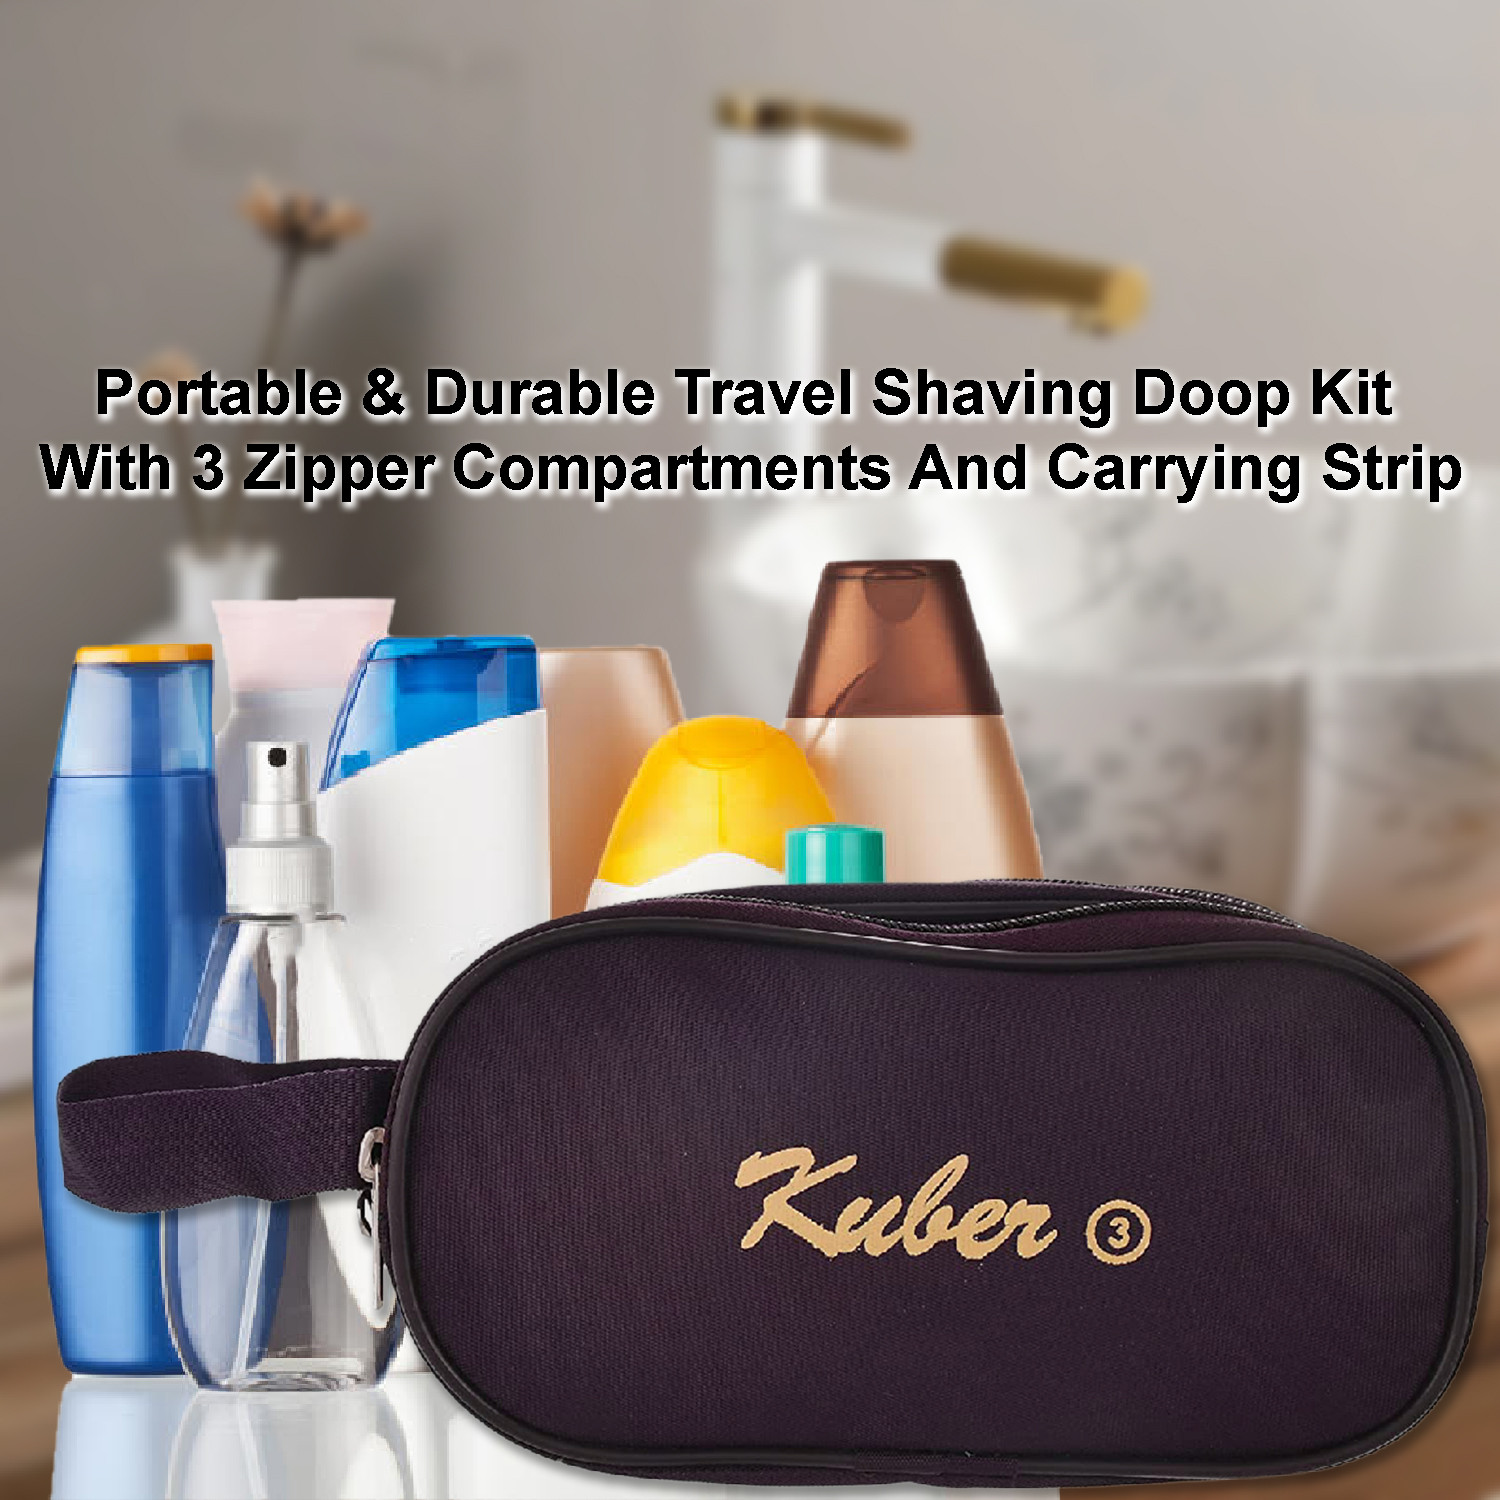 Kuber Industries Canvas Toiletry Organizer|Portable & Durable Travel Shaving Doop Kit With 3 Zipper ComparMants And Carrying Strip (Maroon)